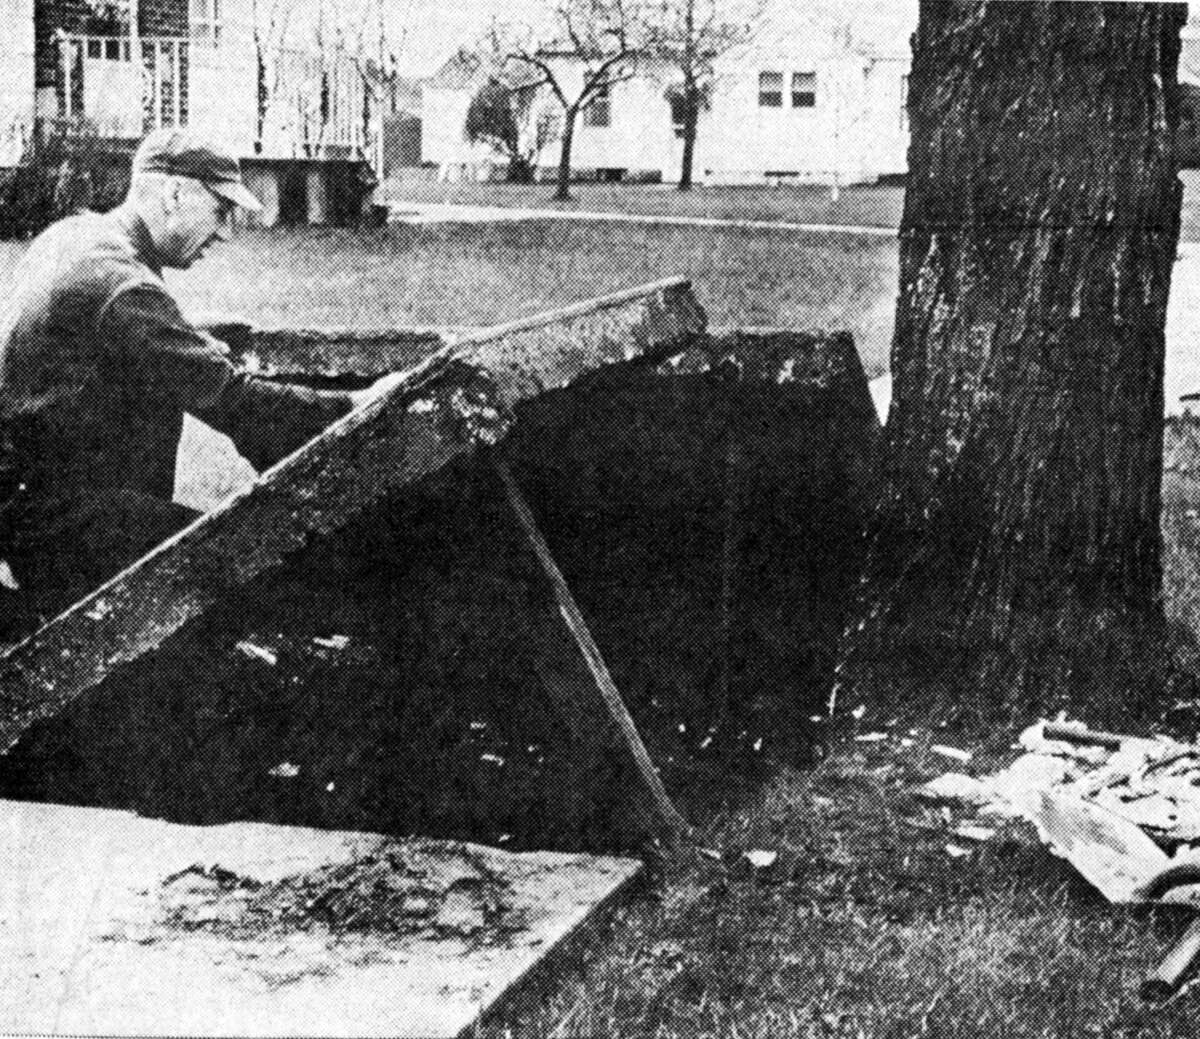 A typical scene in the city in recent weeks is the sidewalk repair going on as part of the city improvement plan's sidewalk repair work. Louis Gumbus of 409 Eighth St. works on his sidewalk, cutting the roots of a large tree to allow space for a concrete section of walk. The photo was published in the News Advocate on May 11, 1962.